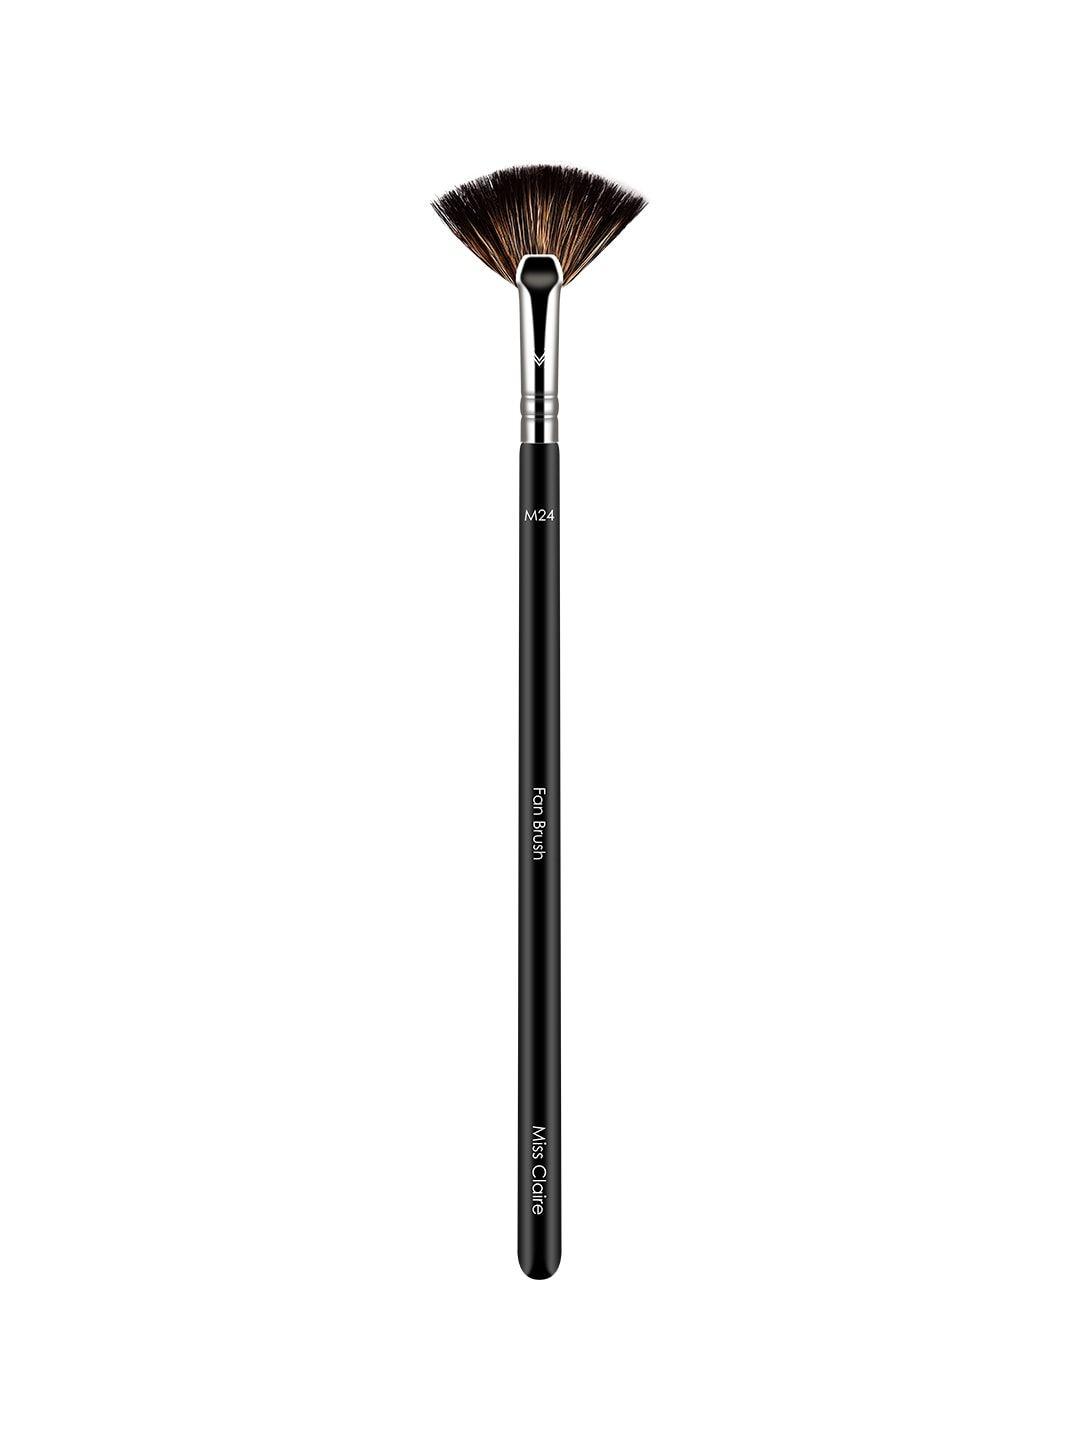 miss claire m24 - fan brush - silver-toned & black